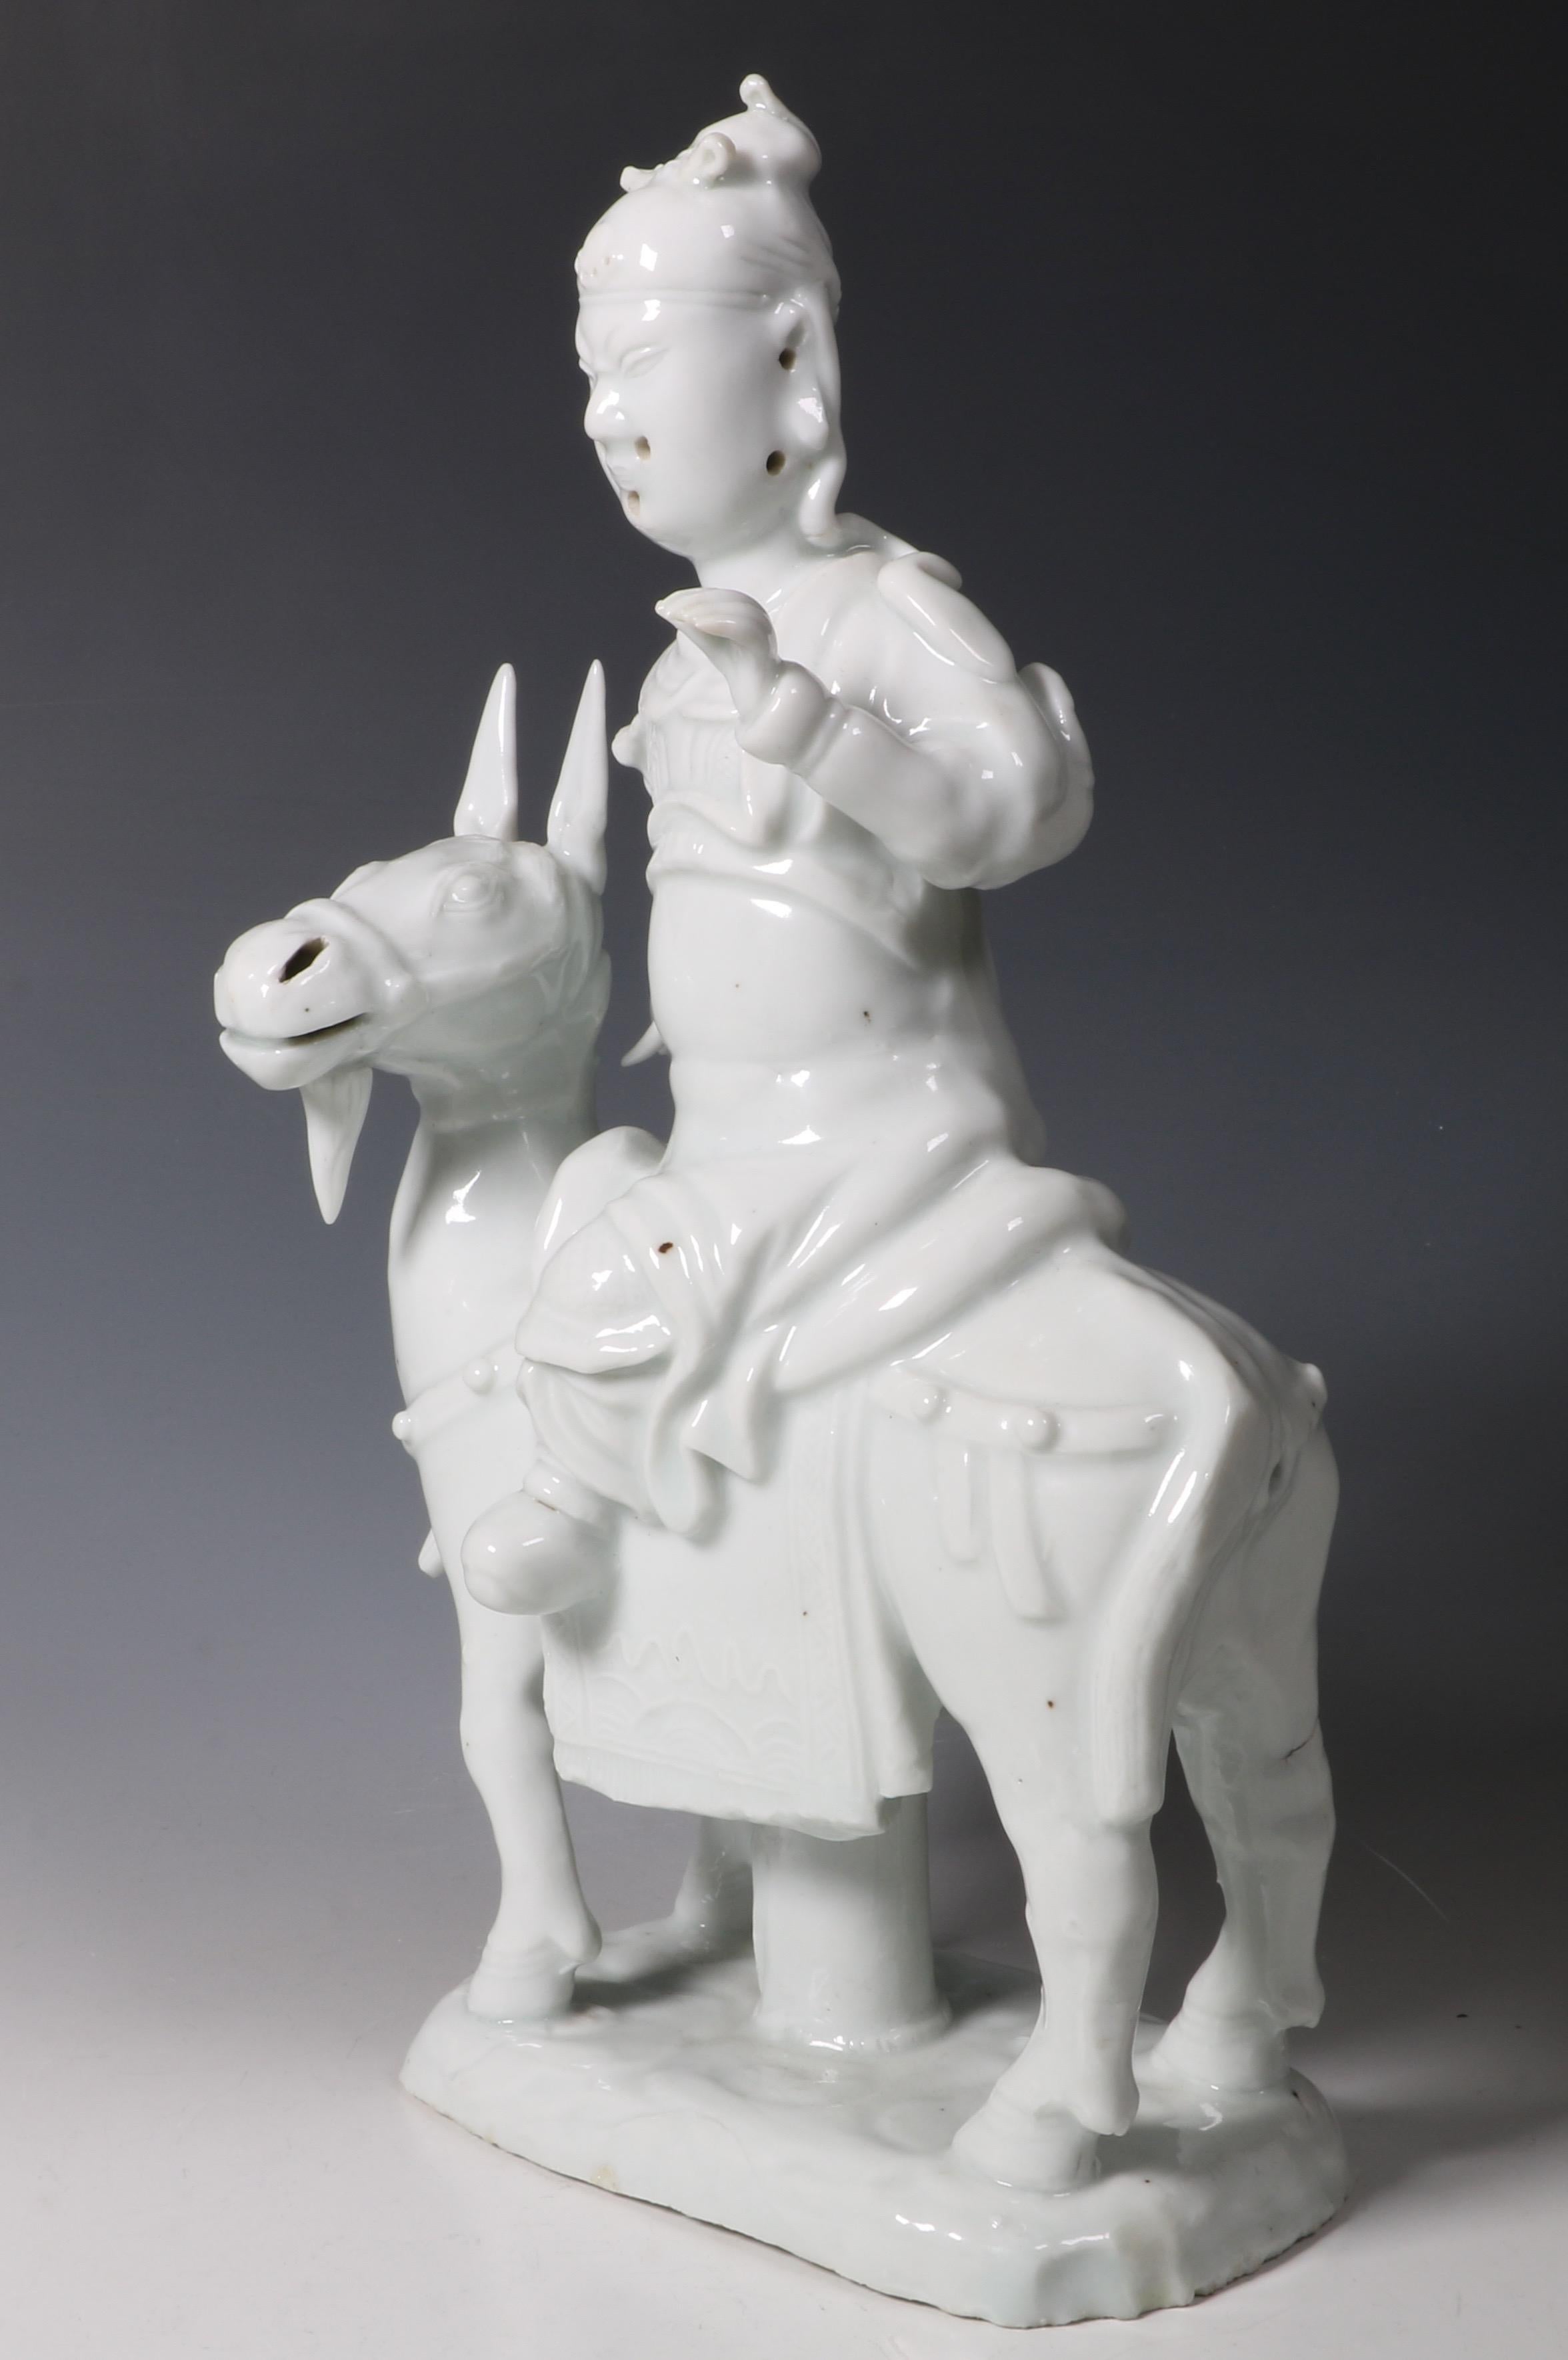 Chinese Porcelain Blanc de Chine Figure of Guandi Kangxi, Late 17th Century For Sale 1